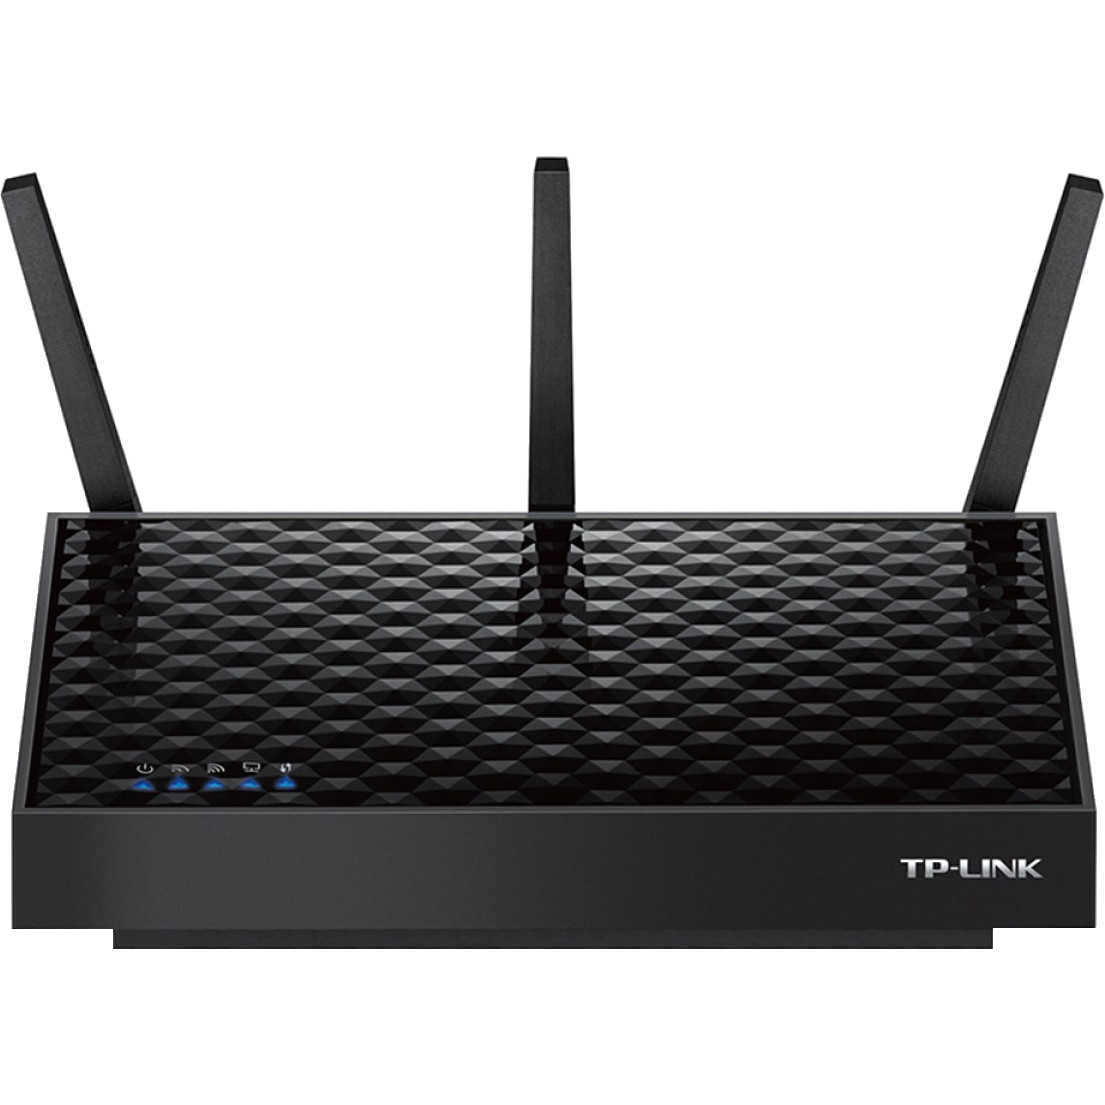  Acces Point TP-Link AP500, Dual-Band, AC1900 